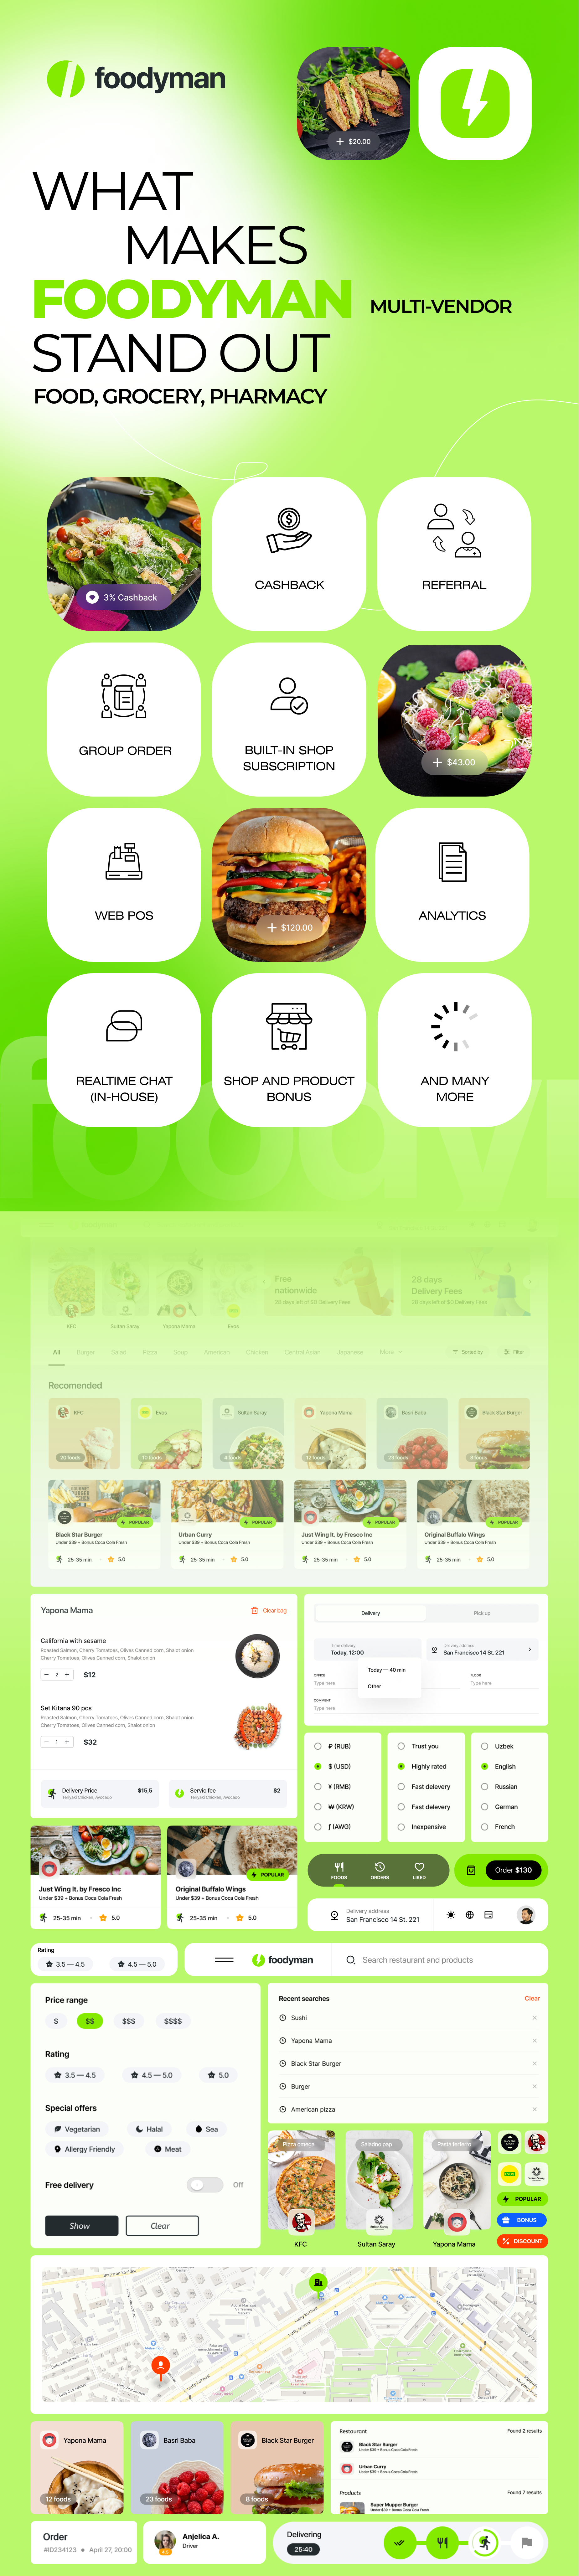 Foodyman - Food and Grocery Ordering and Delivery Marketplace (Website & Customer App (iOS&Android)) - 8